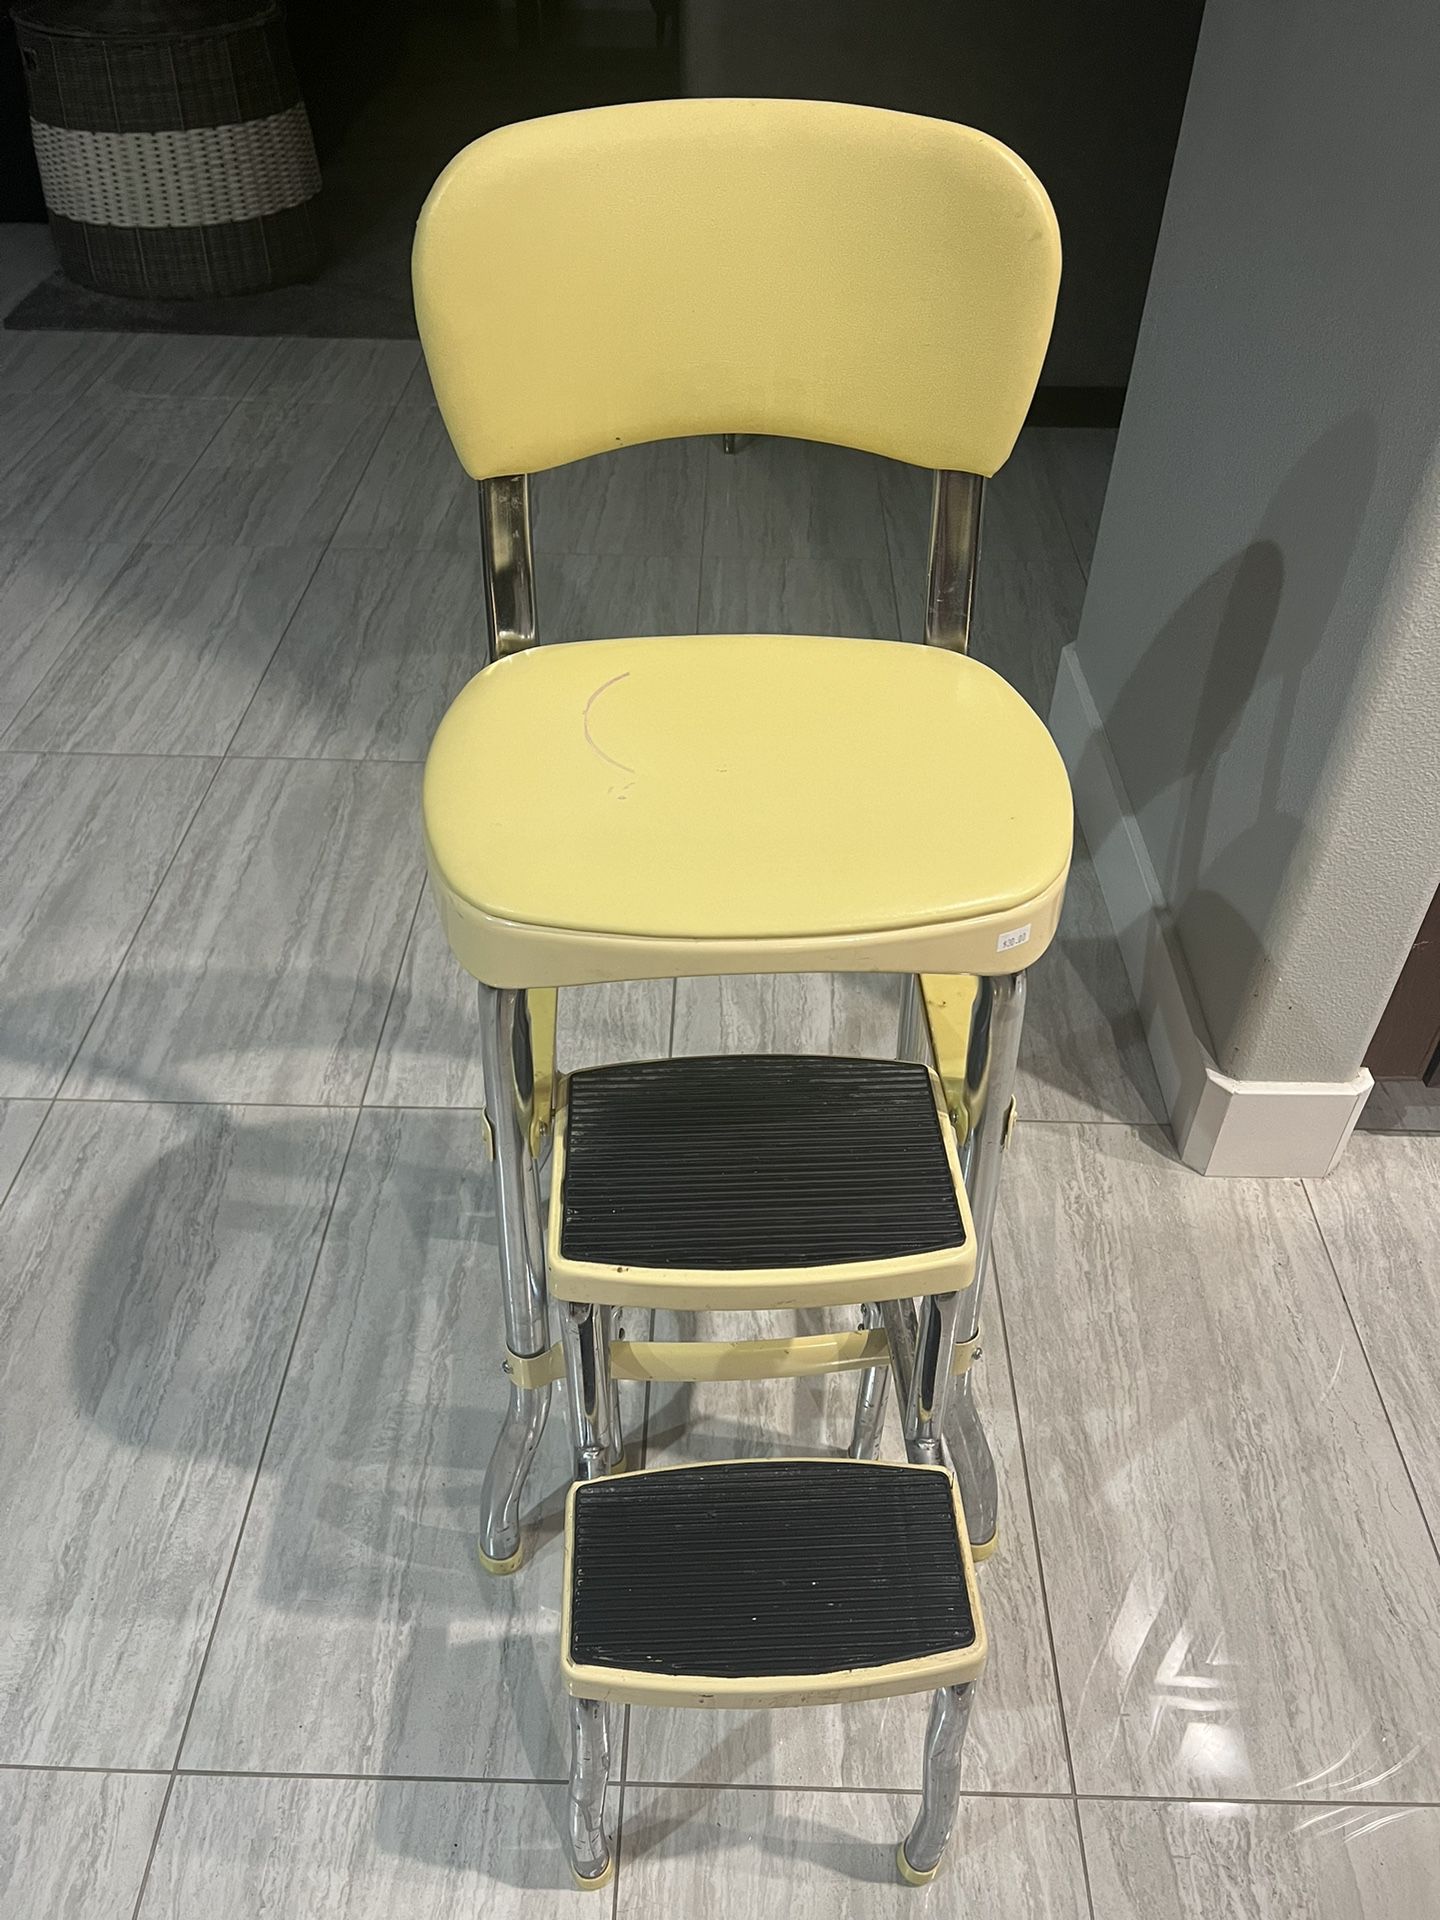 Vintage Cosco Yellow Step Stool Chair w/Pull Out Steps & Chrome Legs 1950s